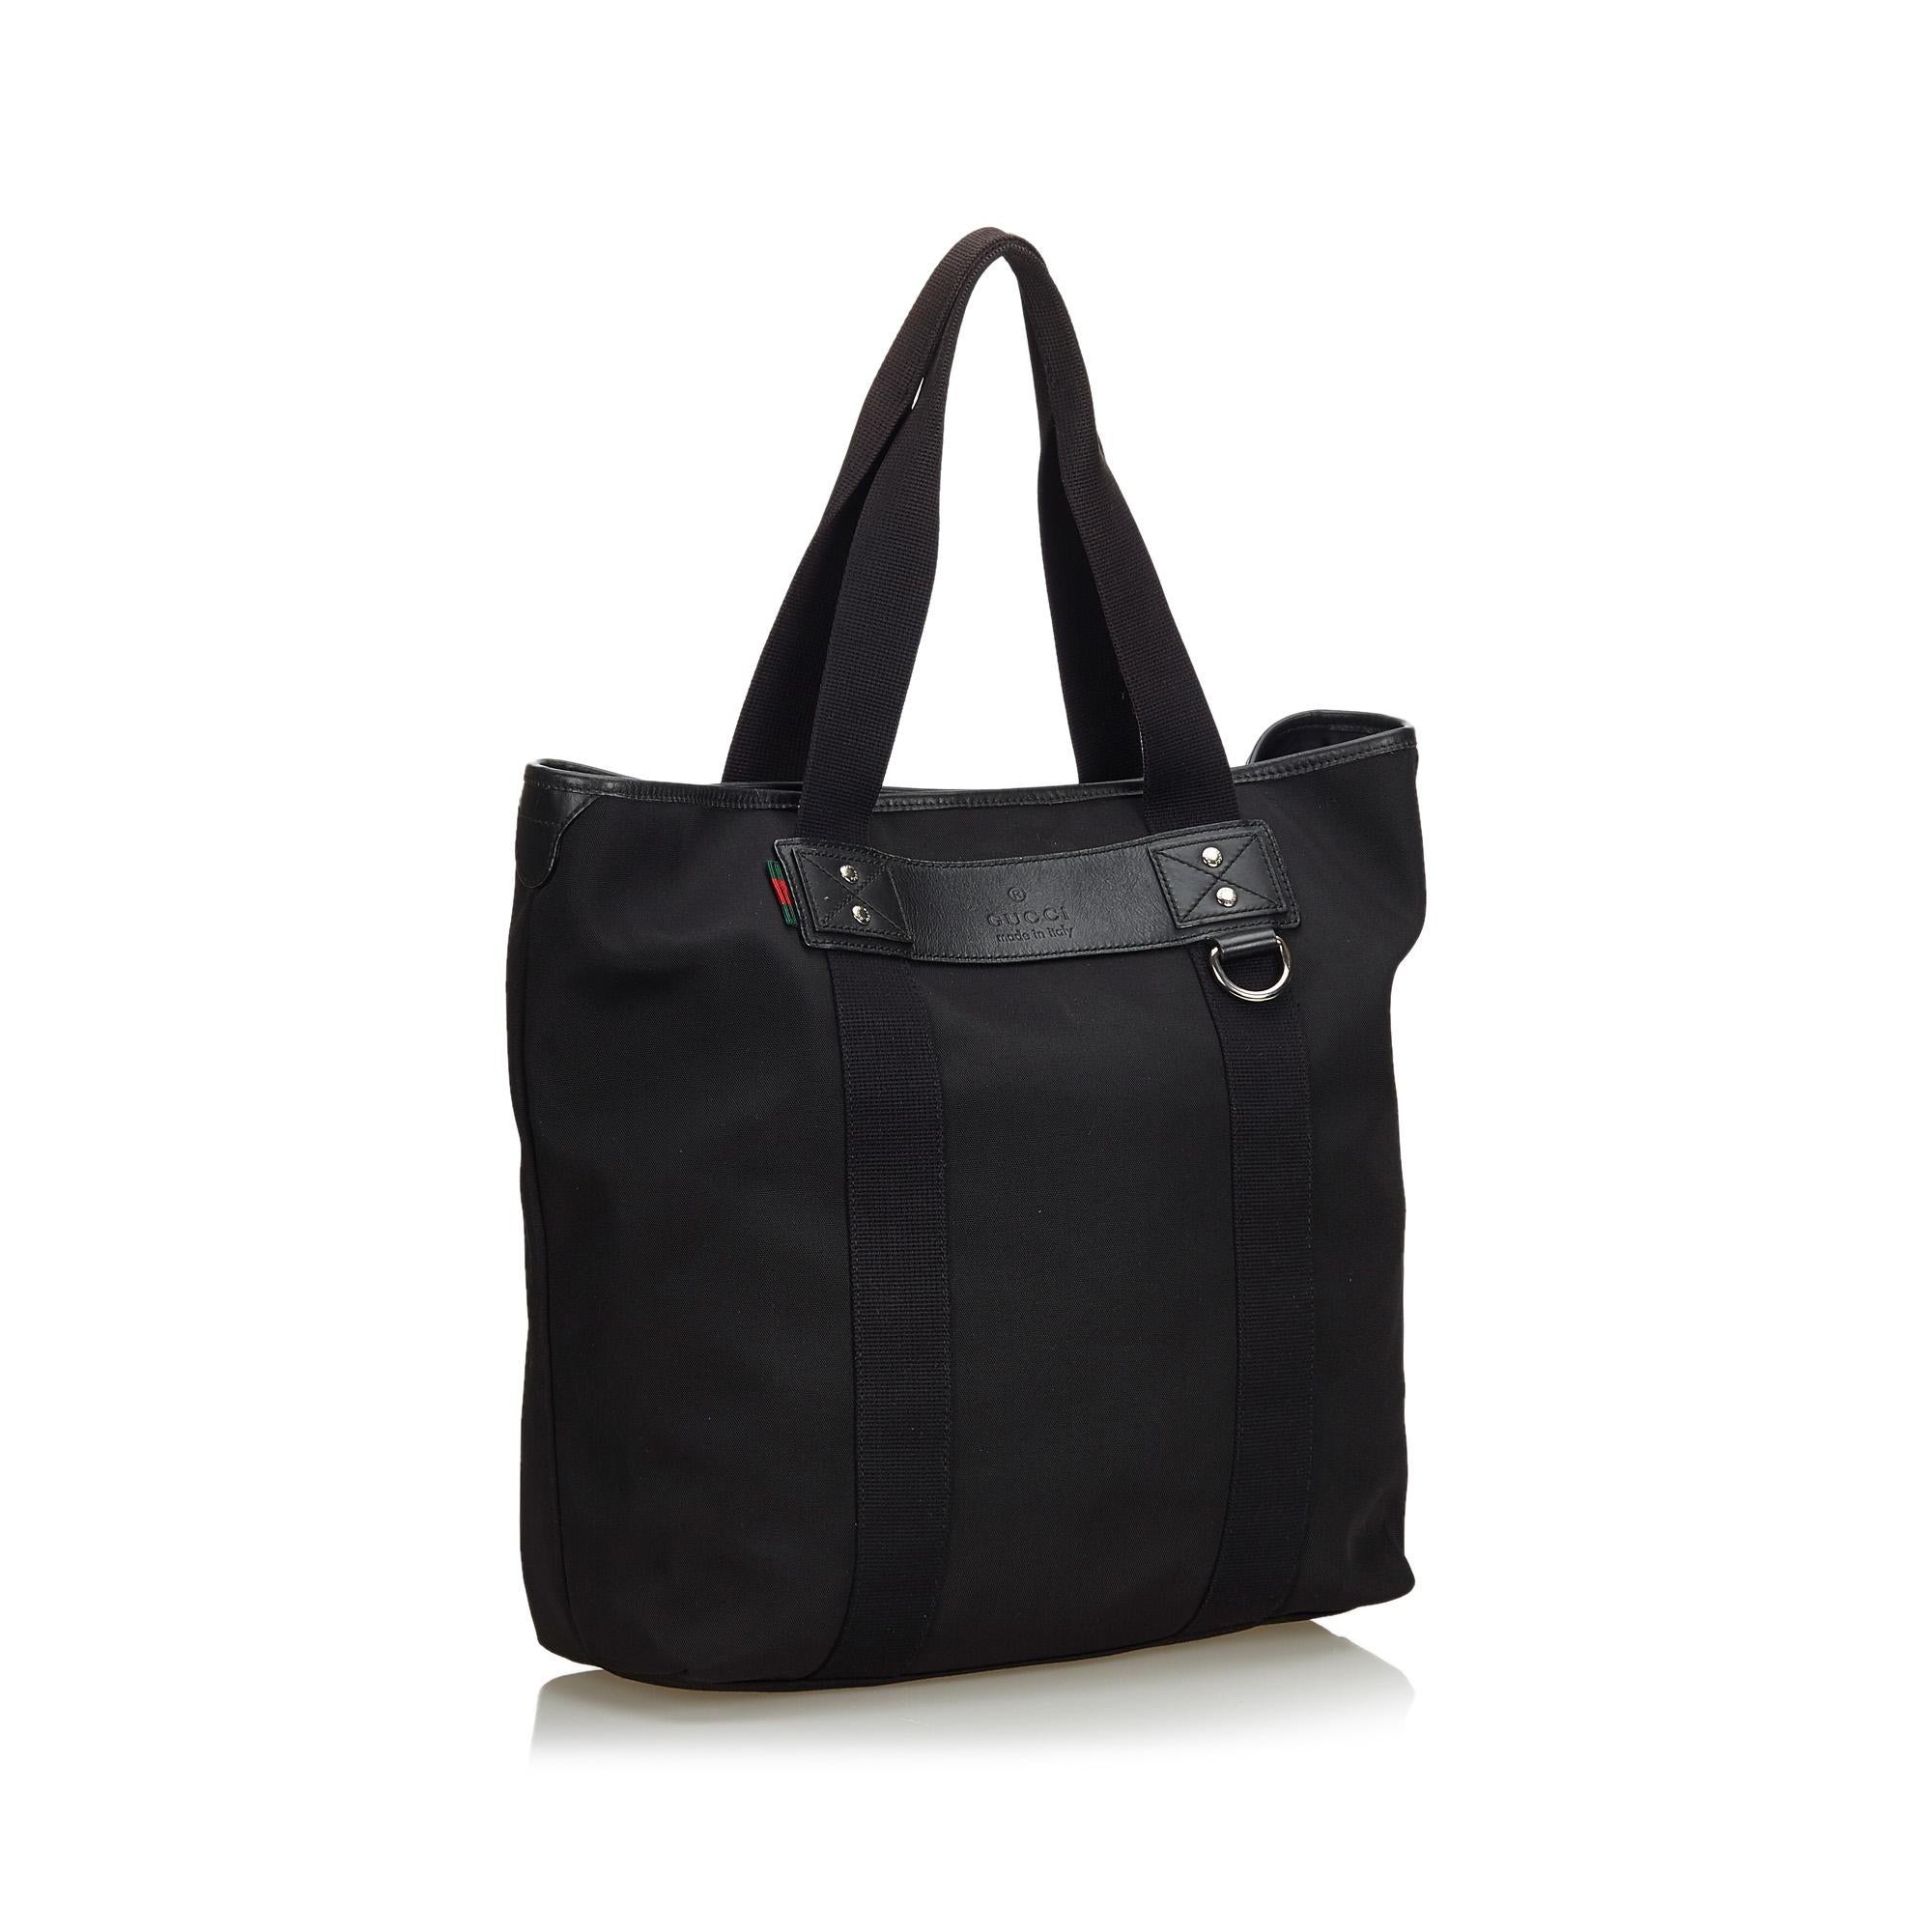 This tote bag features a nylon body with leather trim, flat straps, an open top, and interior zip and slip pockets. It carries as AB condition rating.

Inclusions: 
This item does not come with inclusions.

Dimensions:
Length: 38.00 cm
Width: 41.50